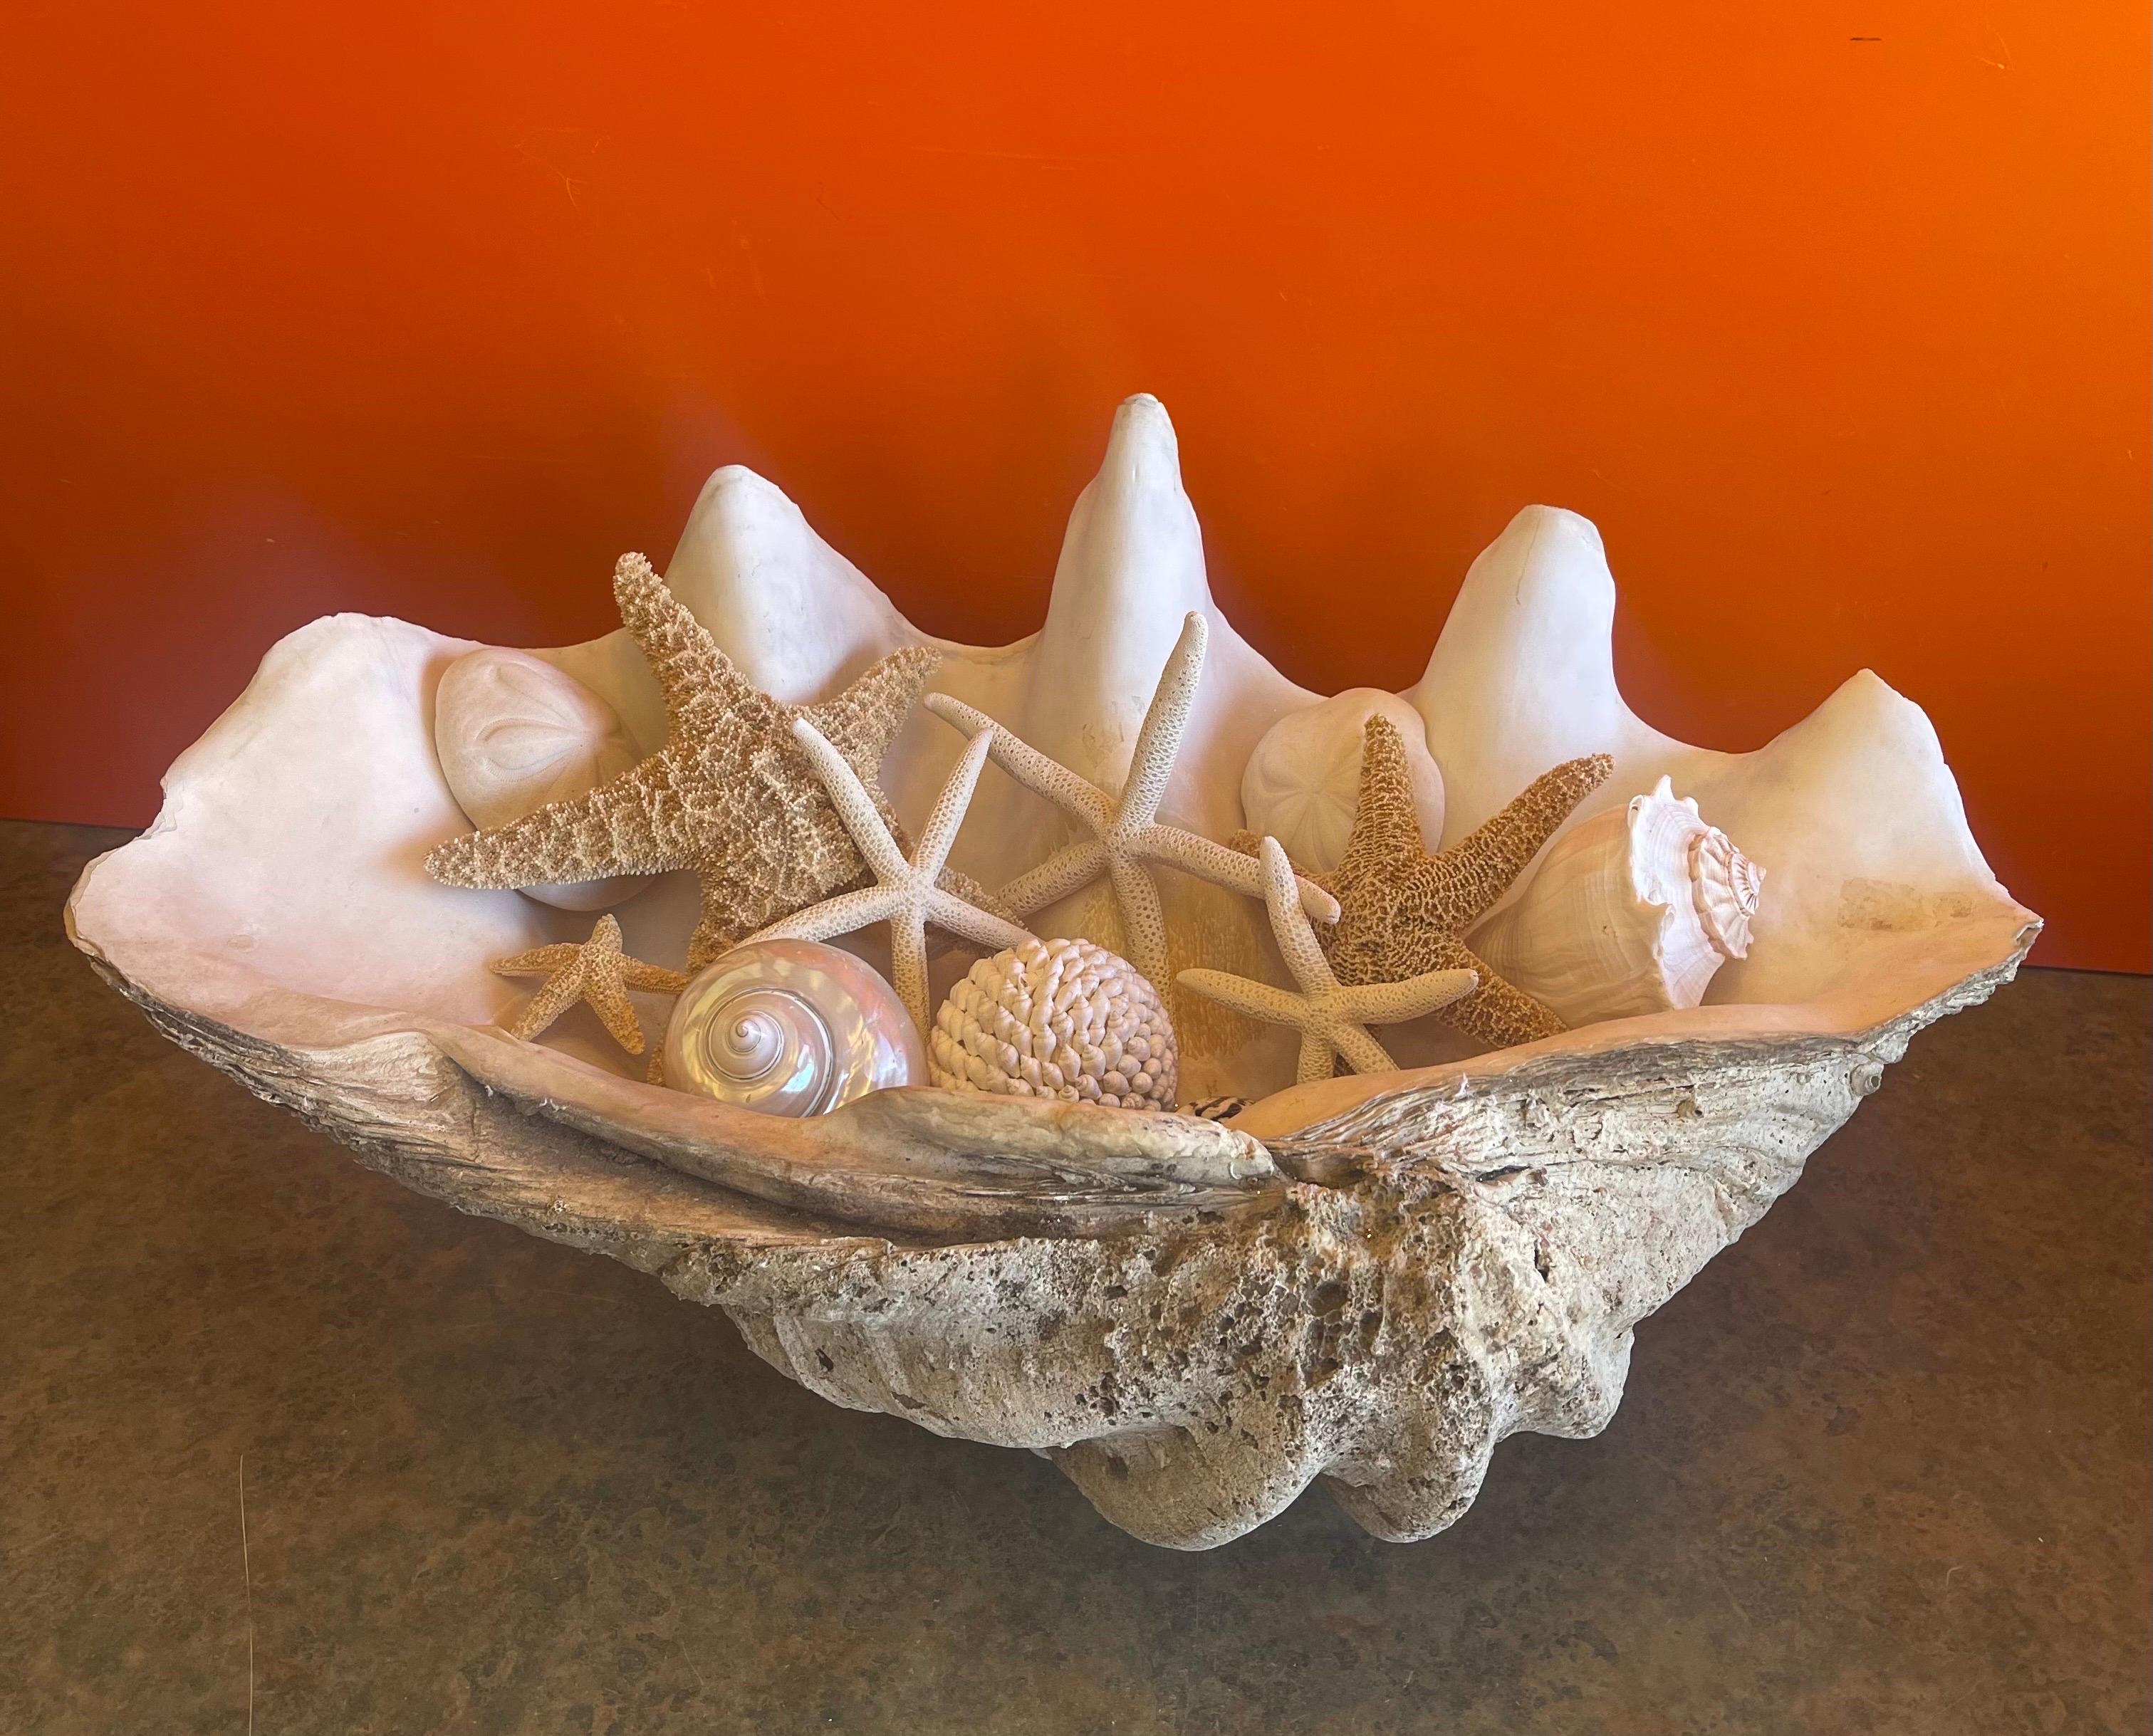 A massive sculptural giant south Pacific Ocean clam shell (Tridacna gigas) with decorative shells and starfish, circa 20th century.  This magnificent piece is in very good condition and measures 26